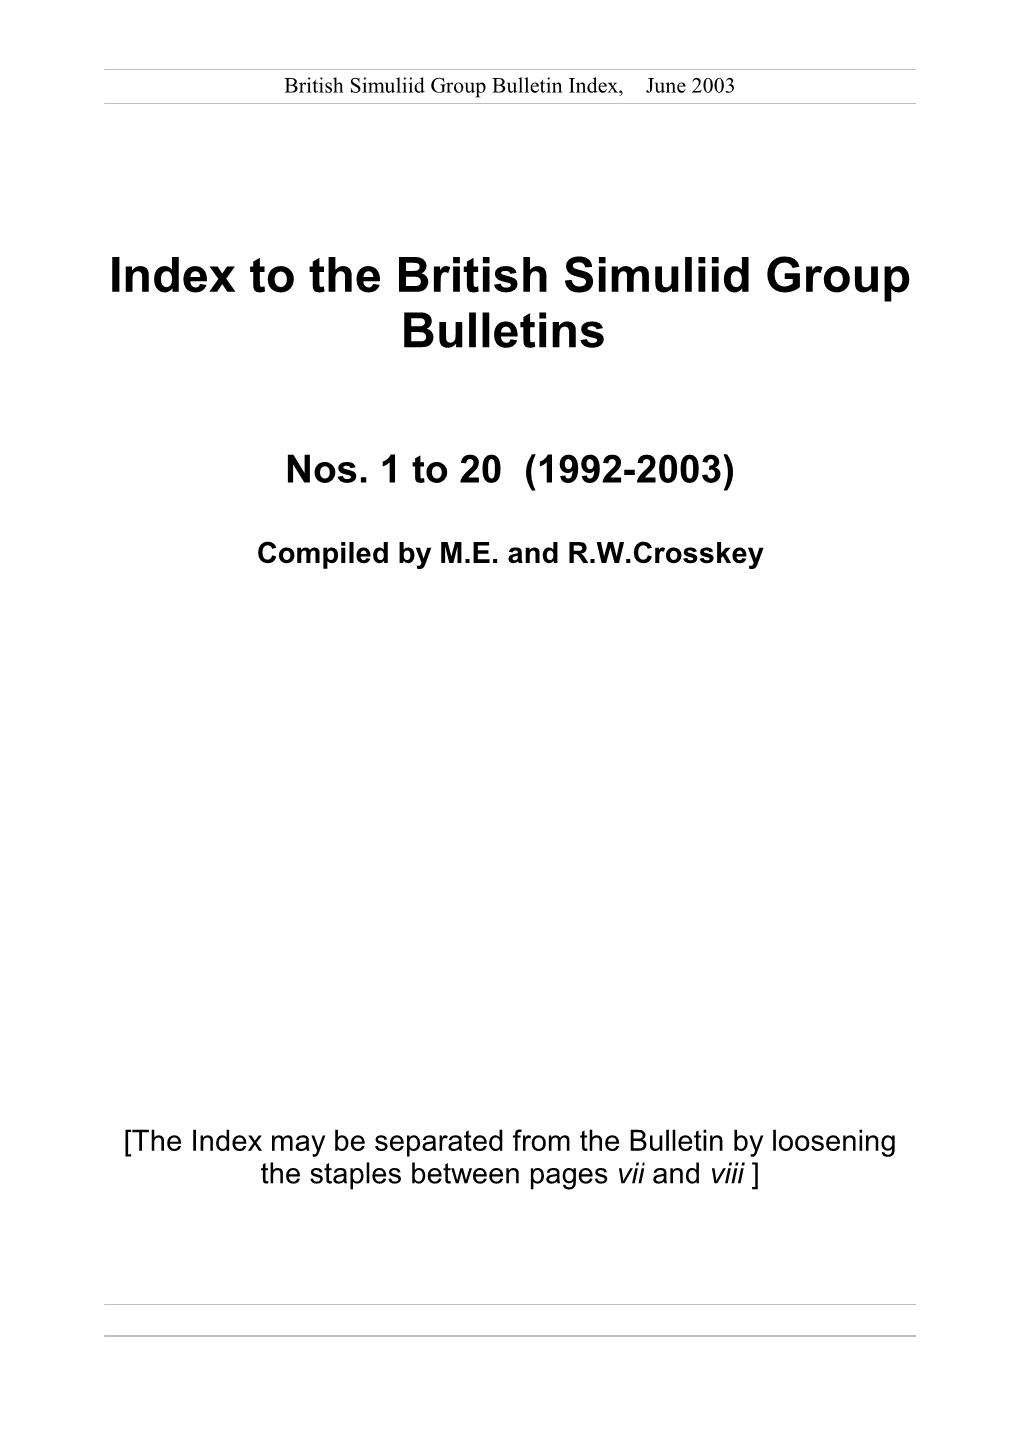 Index to the British Simuliid Group Bulletins